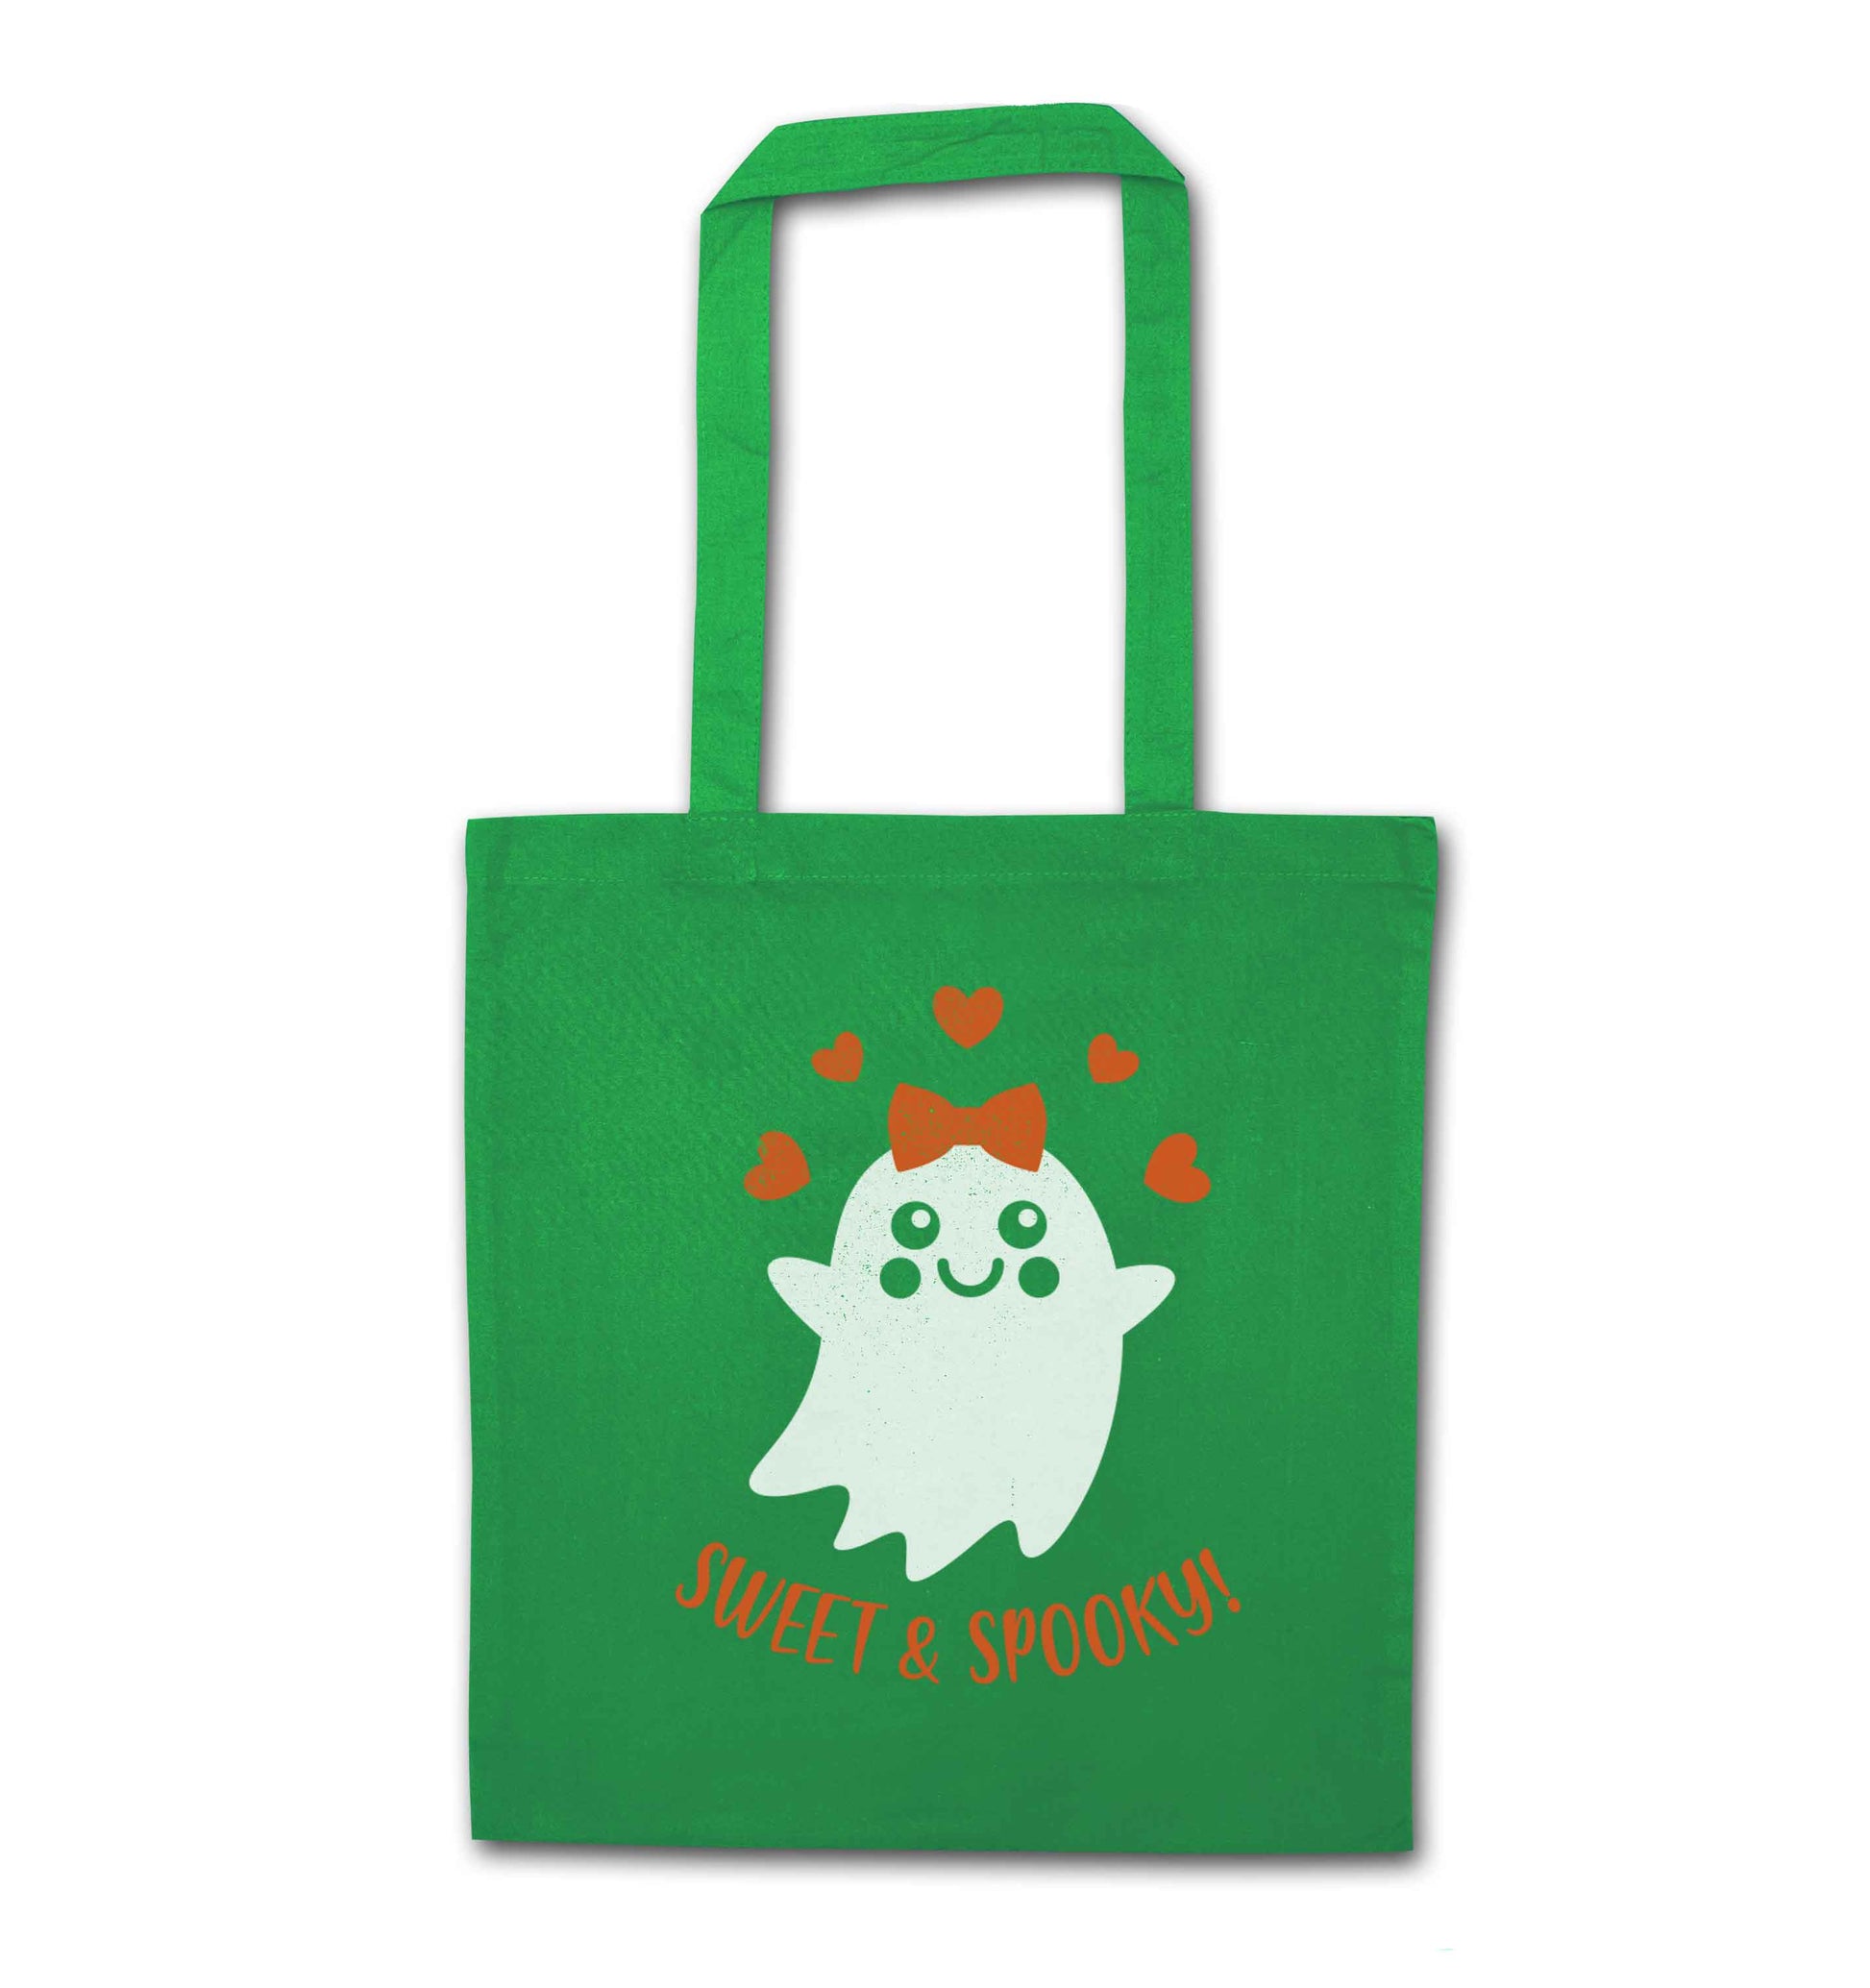 Sweet and spooky green tote bag